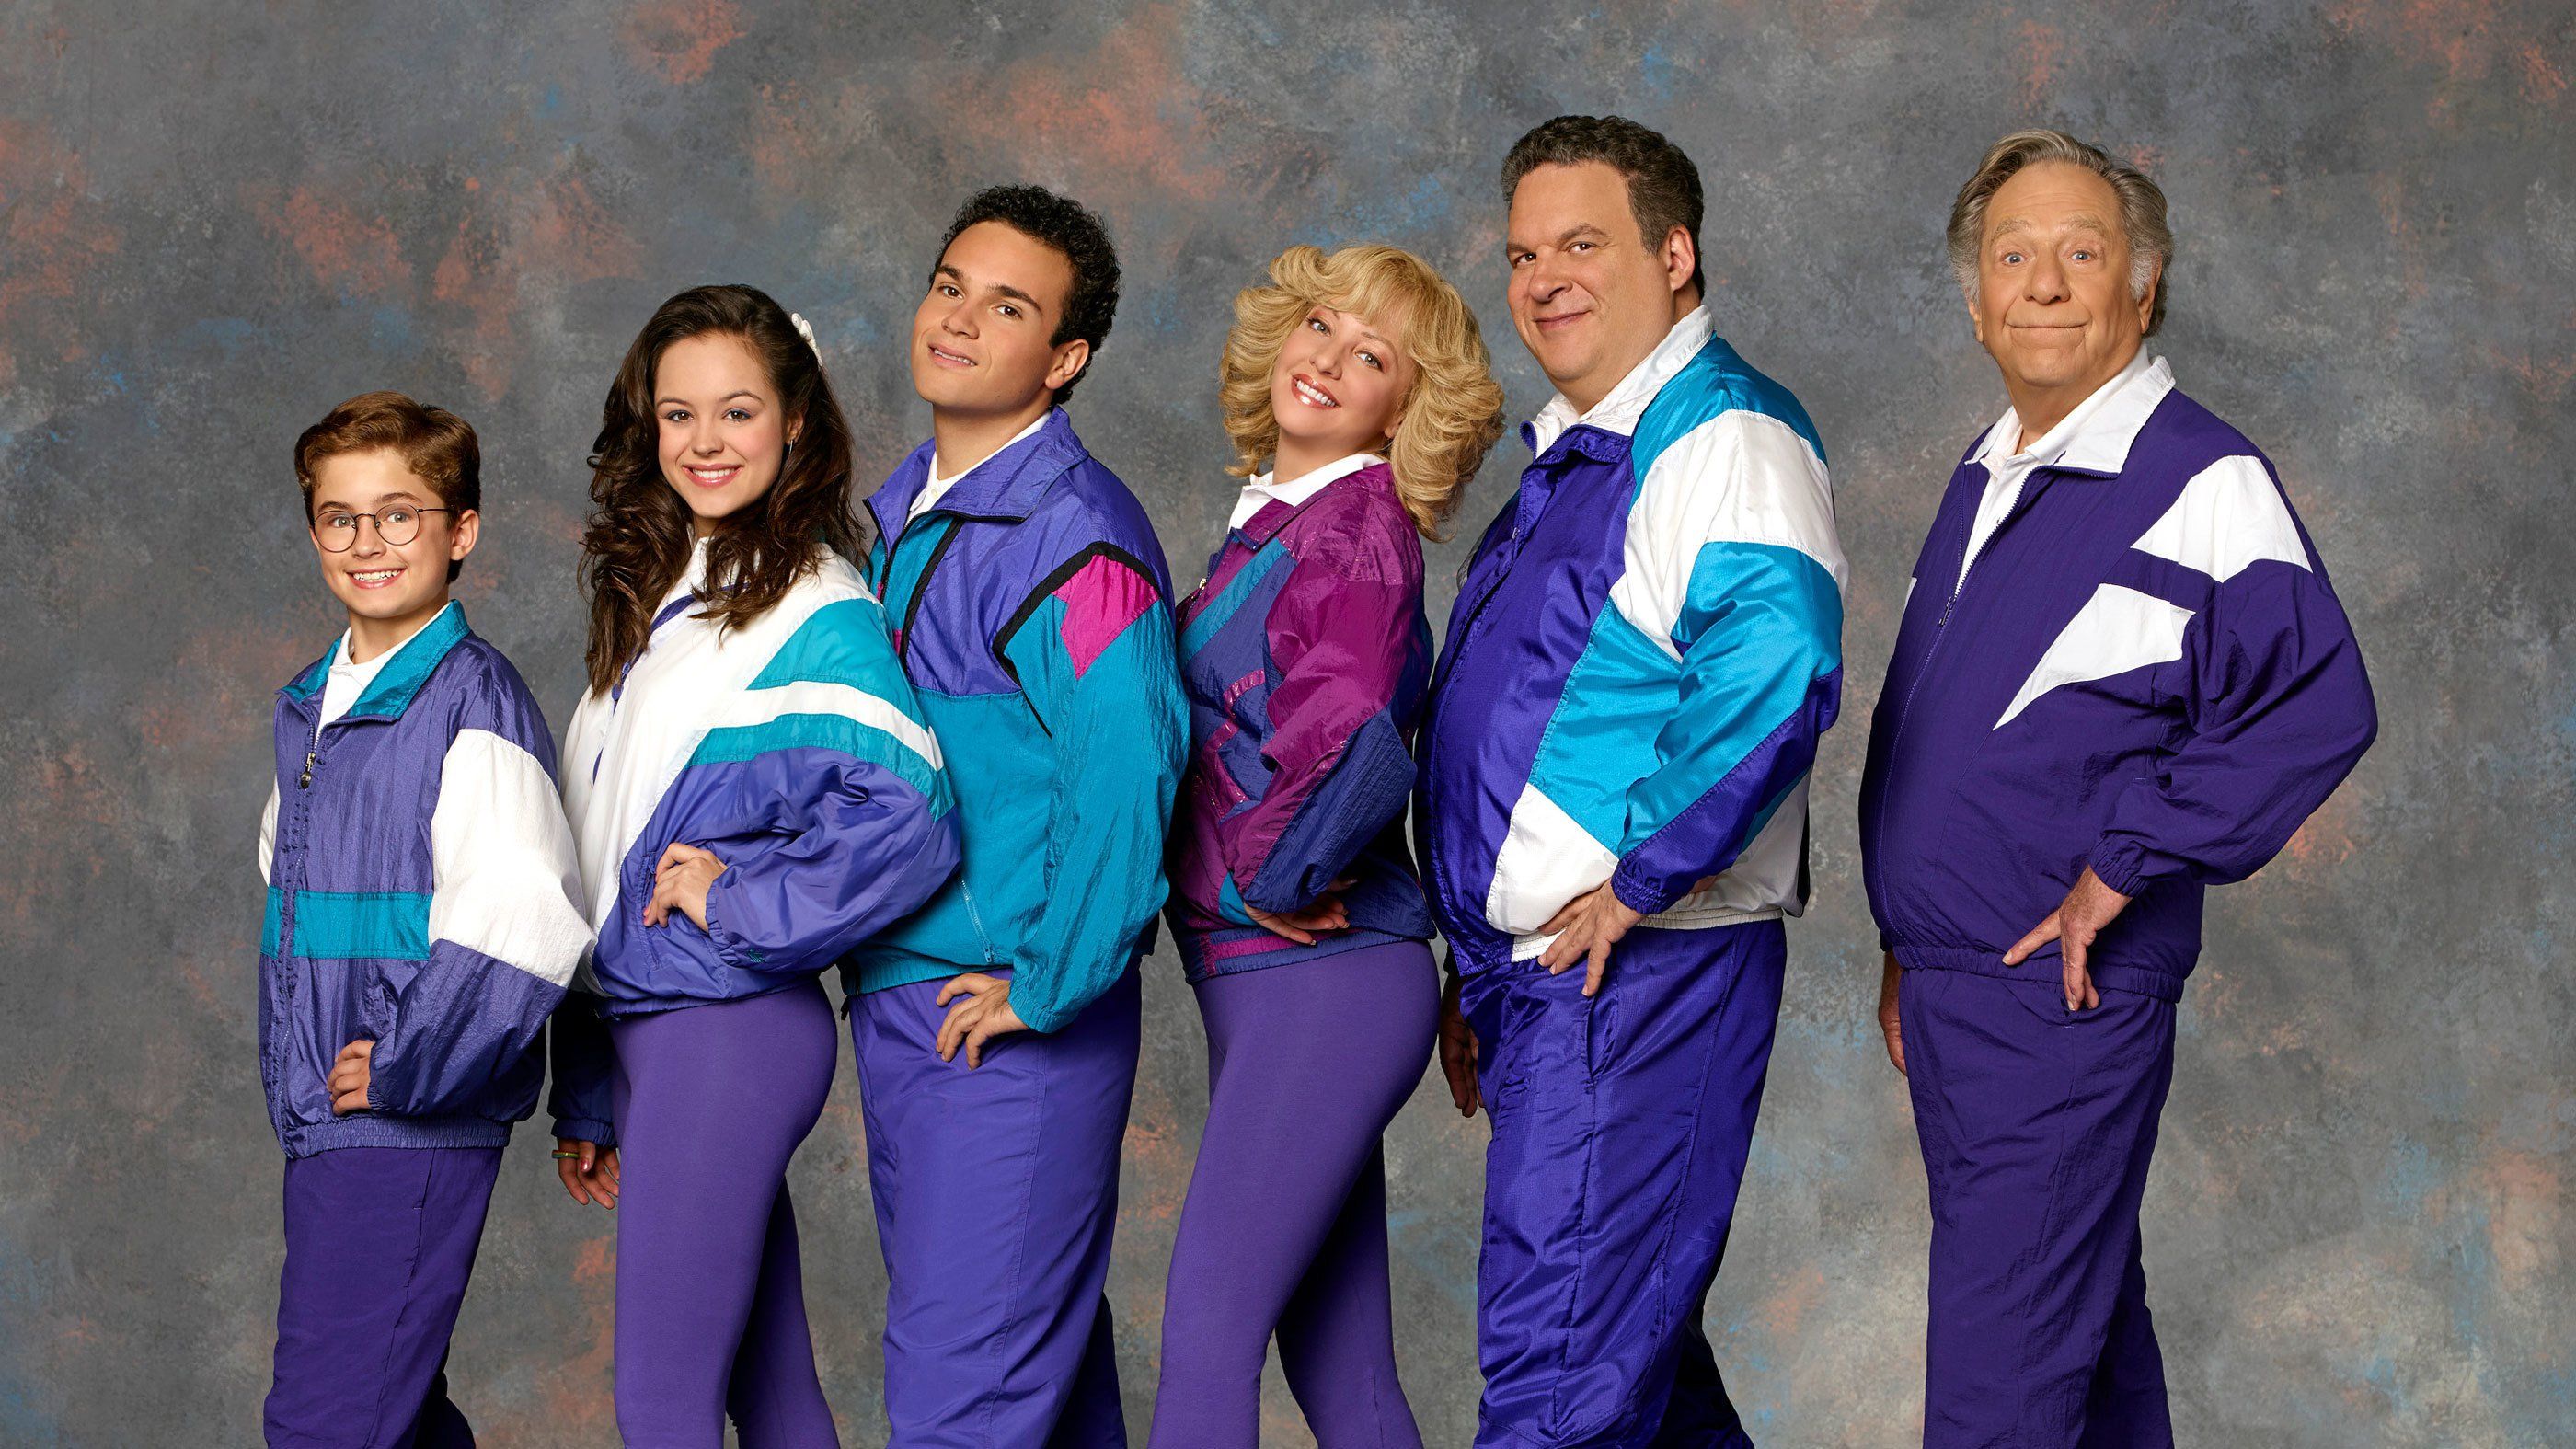 The Goldbergs have created an awkward family portrait in suits